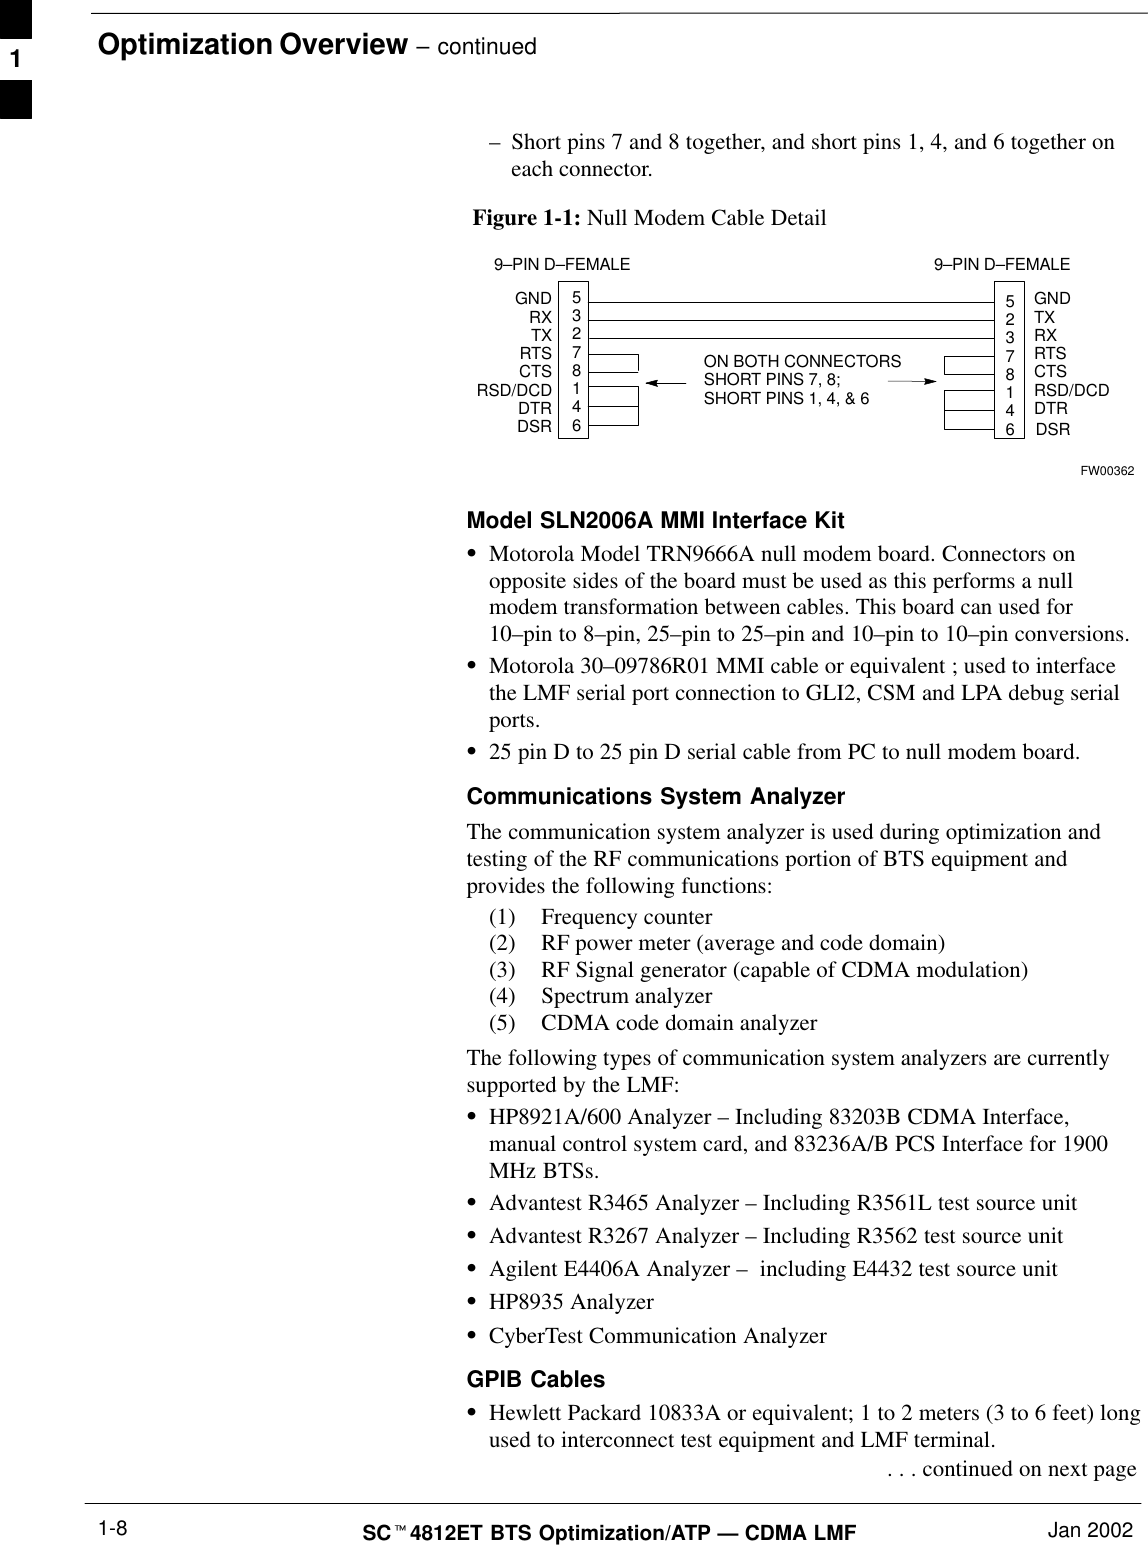 Optimization Overview – continuedSCt4812ET BTS Optimization/ATP — CDMA LMF Jan 20021-8–Short pins 7 and 8 together, and short pins 1, 4, and 6 together oneach connector.Figure 1-1: Null Modem Cable Detail53278146GNDRXTXRTSCTSRSD/DCDDTRGNDTXRXRTSCTSRSD/DCDDTRON BOTH CONNECTORSSHORT PINS 7, 8;SHORT PINS 1, 4, &amp; 69–PIN D–FEMALE 9–PIN D–FEMALE52378146 DSR DSRFW00362Model SLN2006A MMI Interface KitSMotorola Model TRN9666A null modem board. Connectors onopposite sides of the board must be used as this performs a nullmodem transformation between cables. This board can used for10–pin to 8–pin, 25–pin to 25–pin and 10–pin to 10–pin conversions.SMotorola 30–09786R01 MMI cable or equivalent ; used to interfacethe LMF serial port connection to GLI2, CSM and LPA debug serialports.S25 pin D to 25 pin D serial cable from PC to null modem board.Communications System AnalyzerThe communication system analyzer is used during optimization andtesting of the RF communications portion of BTS equipment andprovides the following functions:(1) Frequency counter(2) RF power meter (average and code domain)(3) RF Signal generator (capable of CDMA modulation)(4) Spectrum analyzer(5) CDMA code domain analyzerThe following types of communication system analyzers are currentlysupported by the LMF:SHP8921A/600 Analyzer – Including 83203B CDMA Interface,manual control system card, and 83236A/B PCS Interface for 1900MHz BTSs.SAdvantest R3465 Analyzer – Including R3561L test source unitSAdvantest R3267 Analyzer – Including R3562 test source unitSAgilent E4406A Analyzer –  including E4432 test source unitSHP8935 AnalyzerSCyberTest Communication AnalyzerGPIB CablesSHewlett Packard 10833A or equivalent; 1 to 2 meters (3 to 6 feet) longused to interconnect test equipment and LMF terminal. . . . continued on next page1